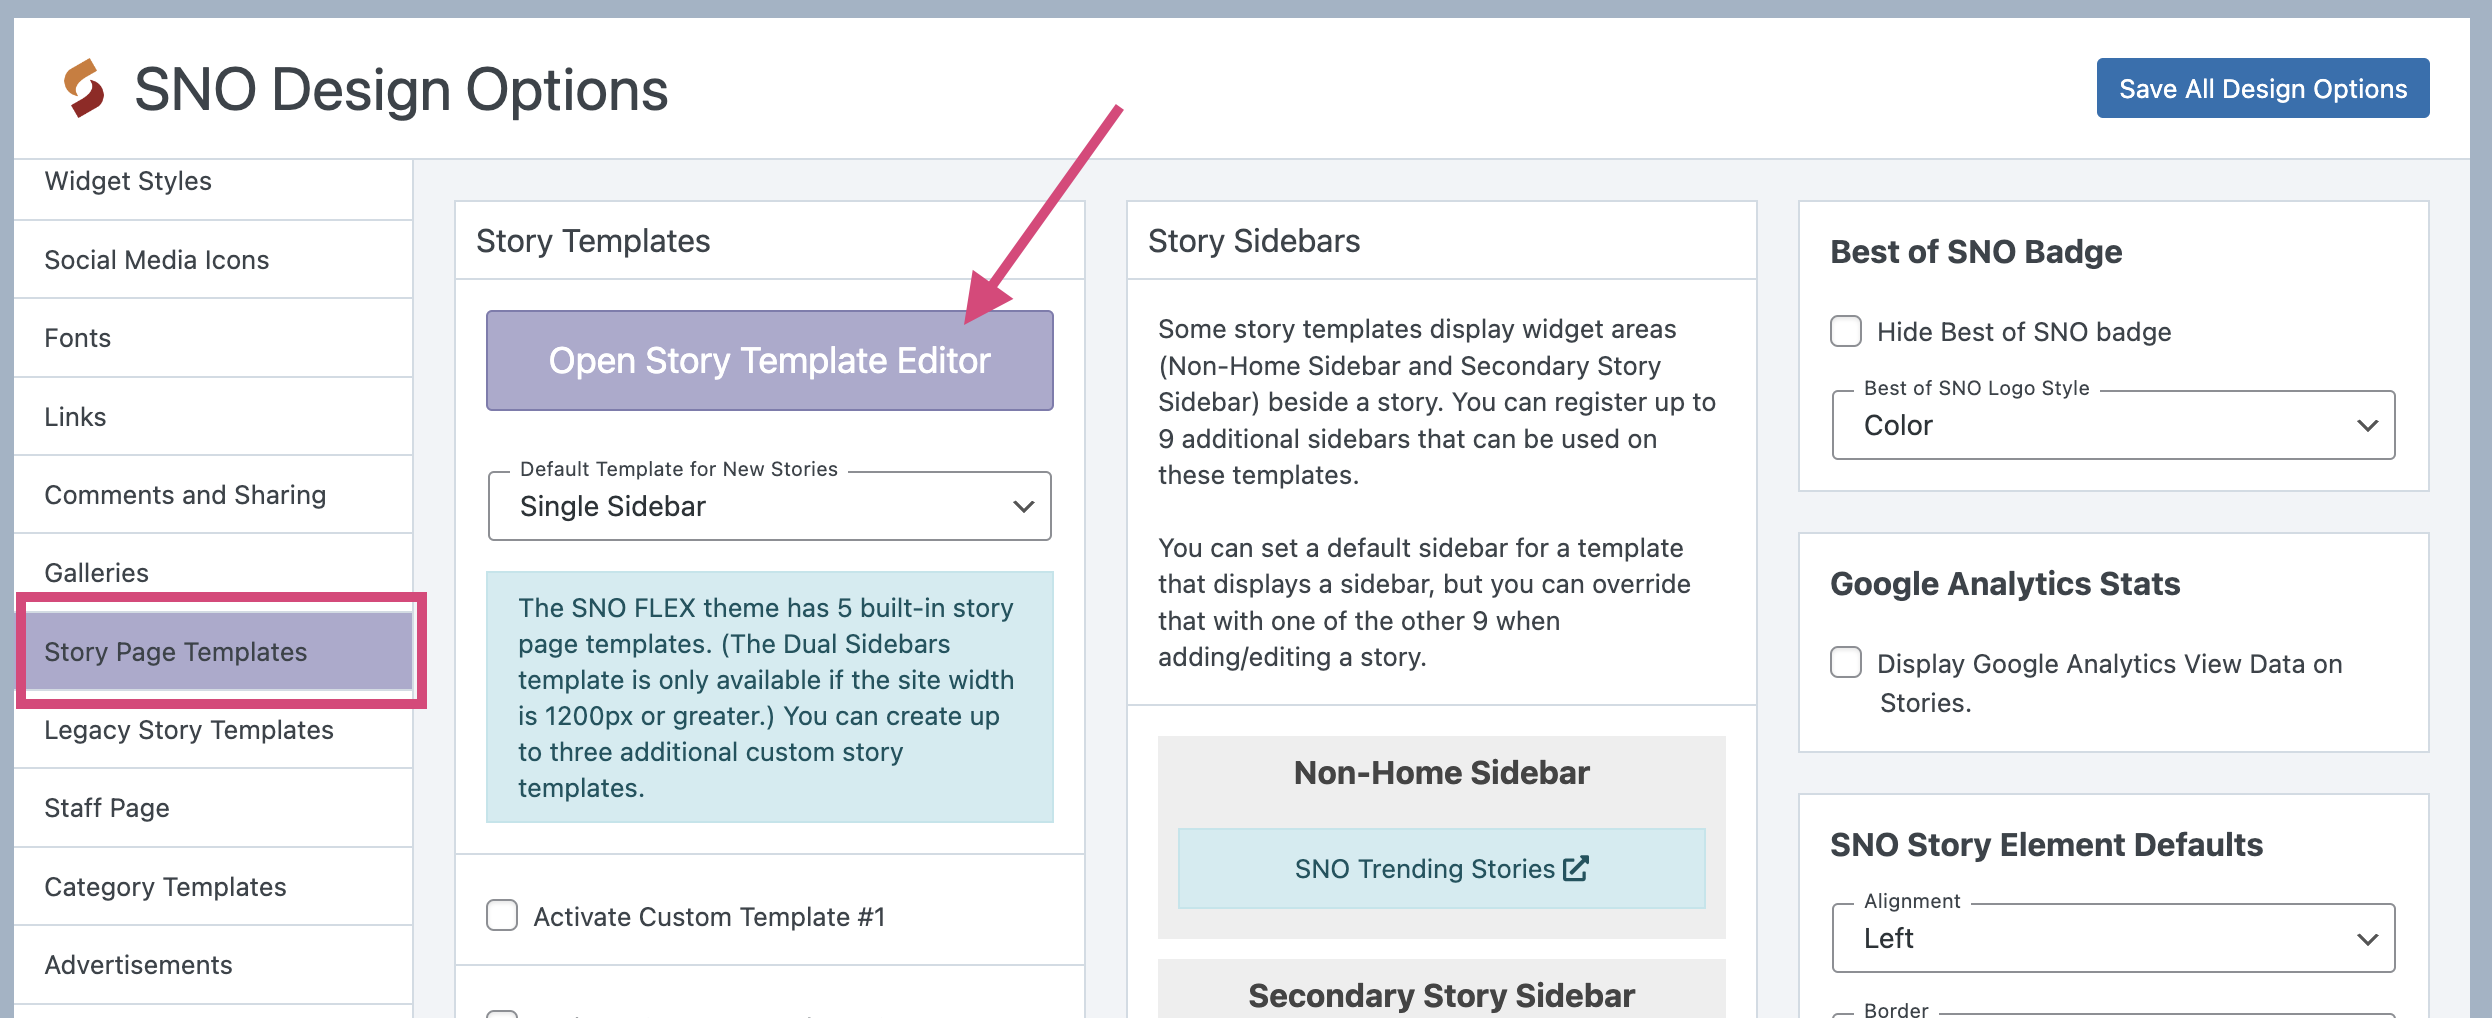 Open Story Template Editor.png